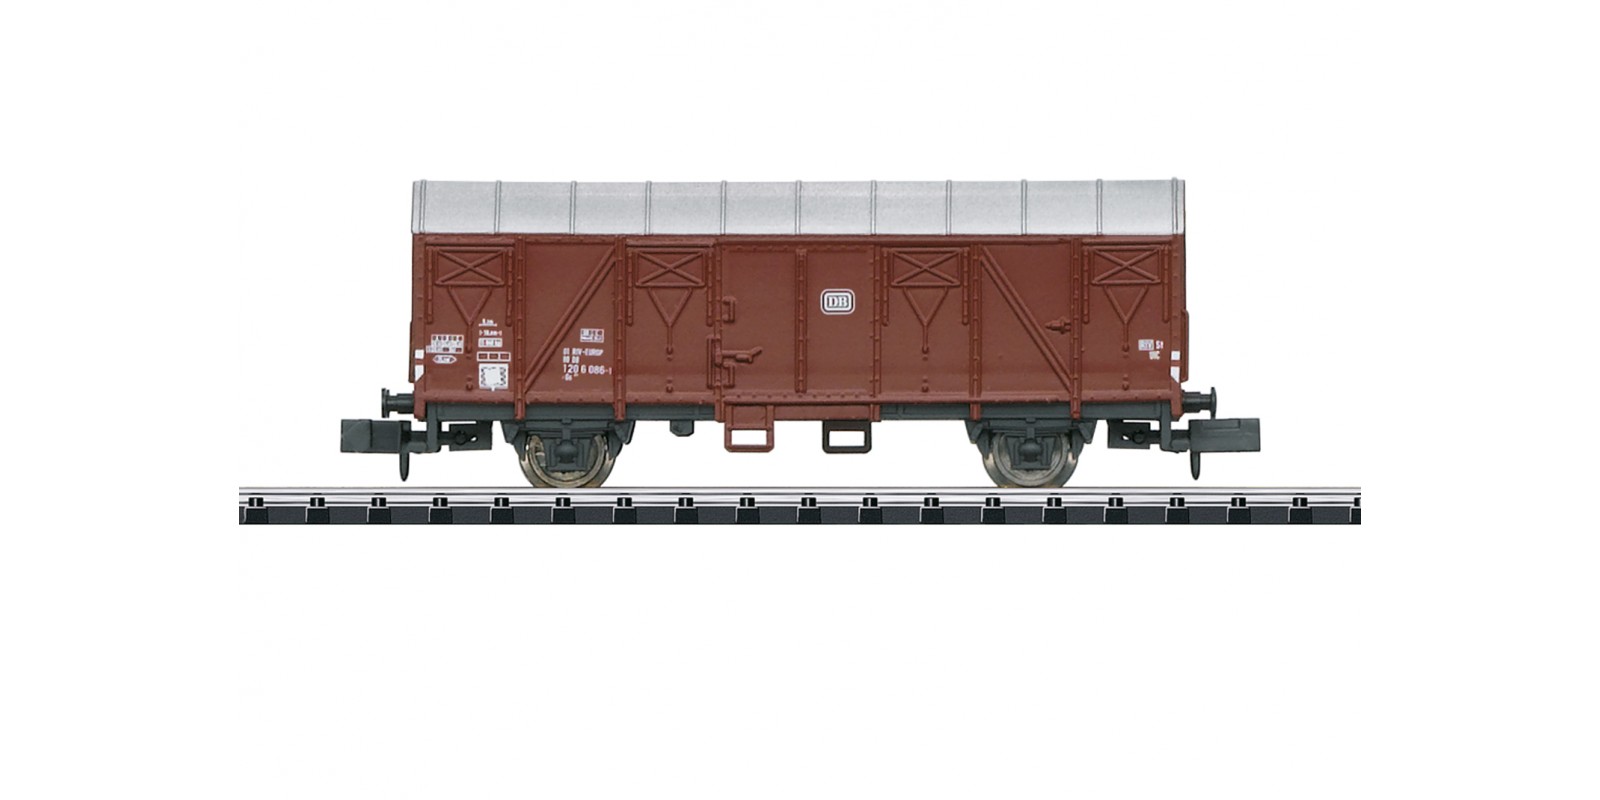 T18097 Hobby Type Gs 210 Freight Car